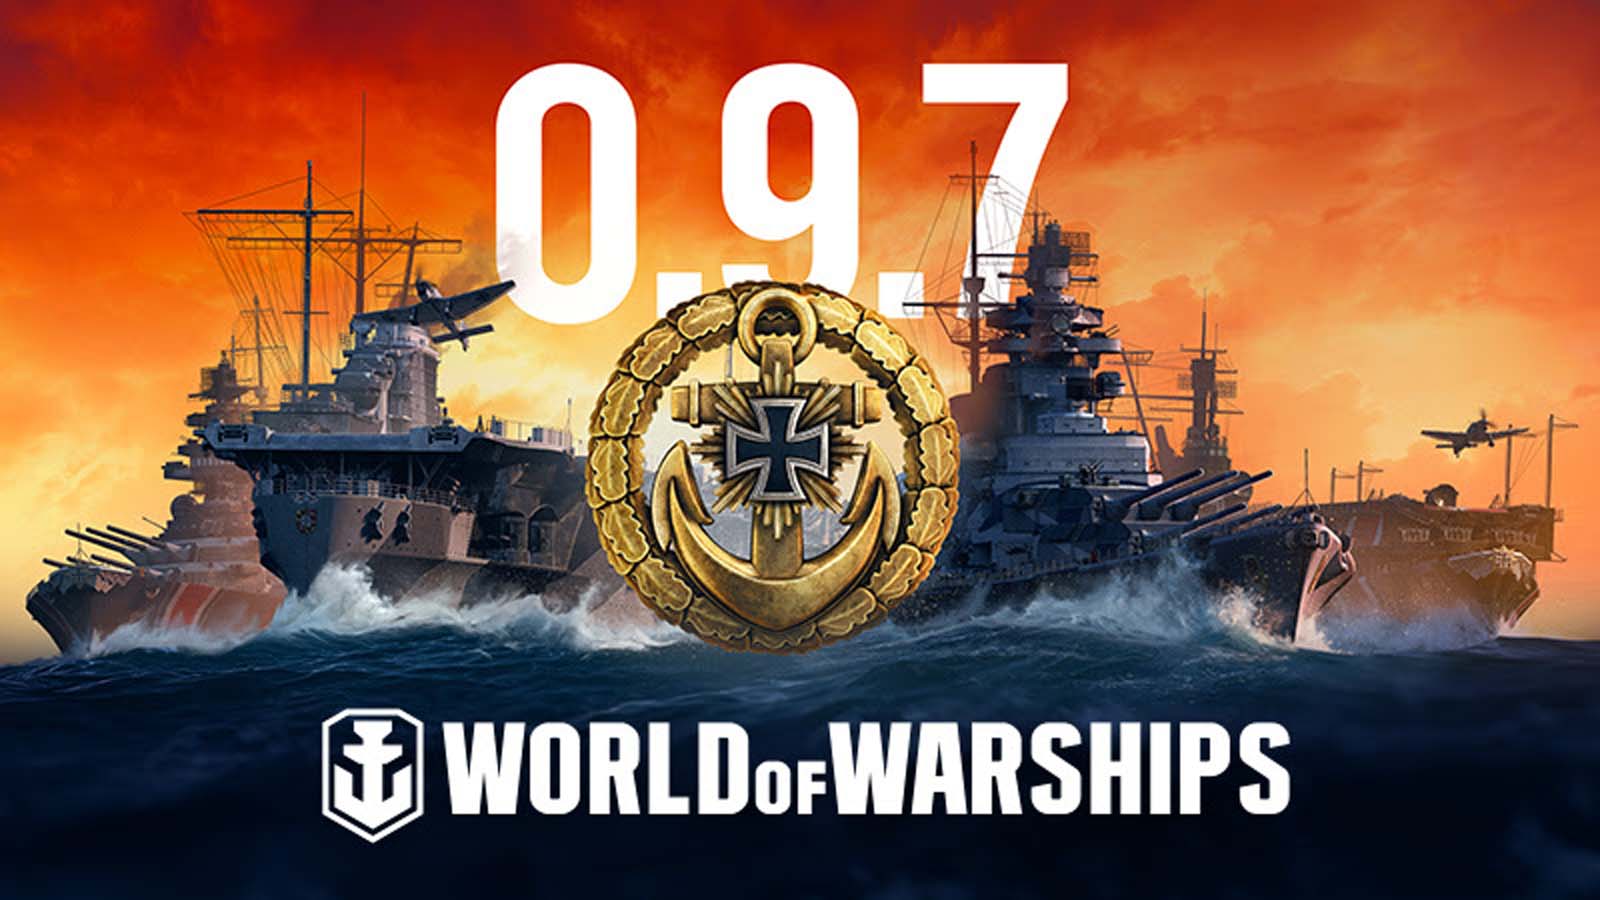 how to control aircraft world of warships 8.0 update